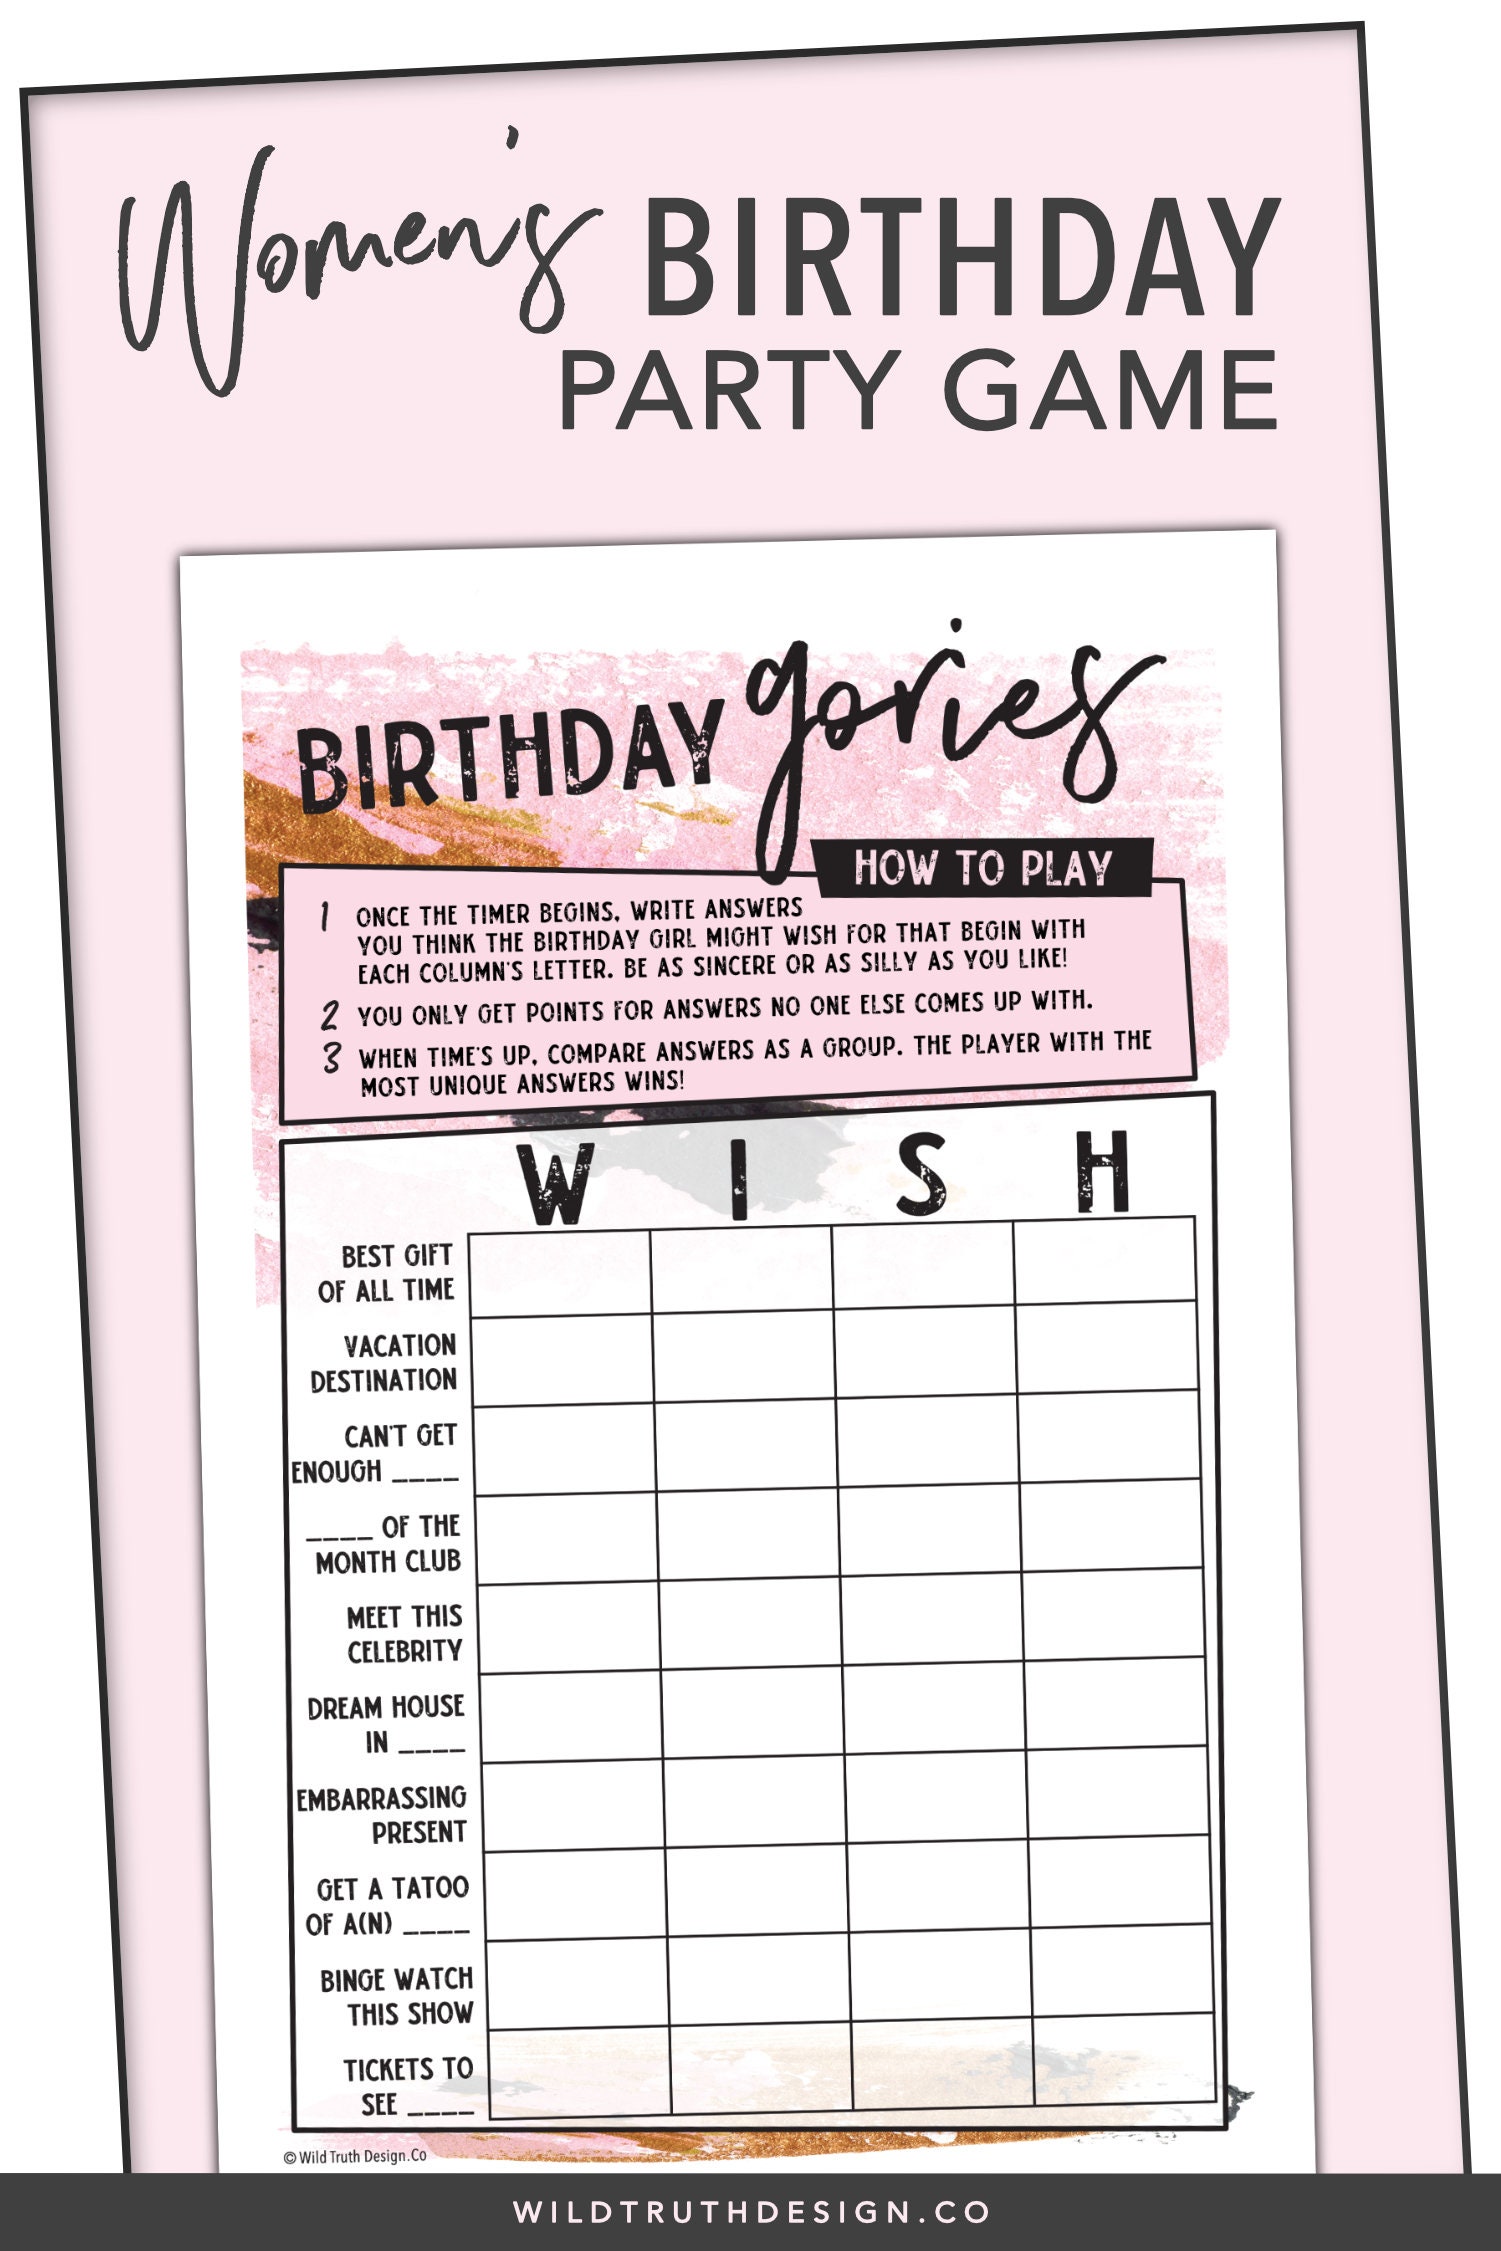 birthday-game-for-adults-women-s-birthdaygories-teen-etsy